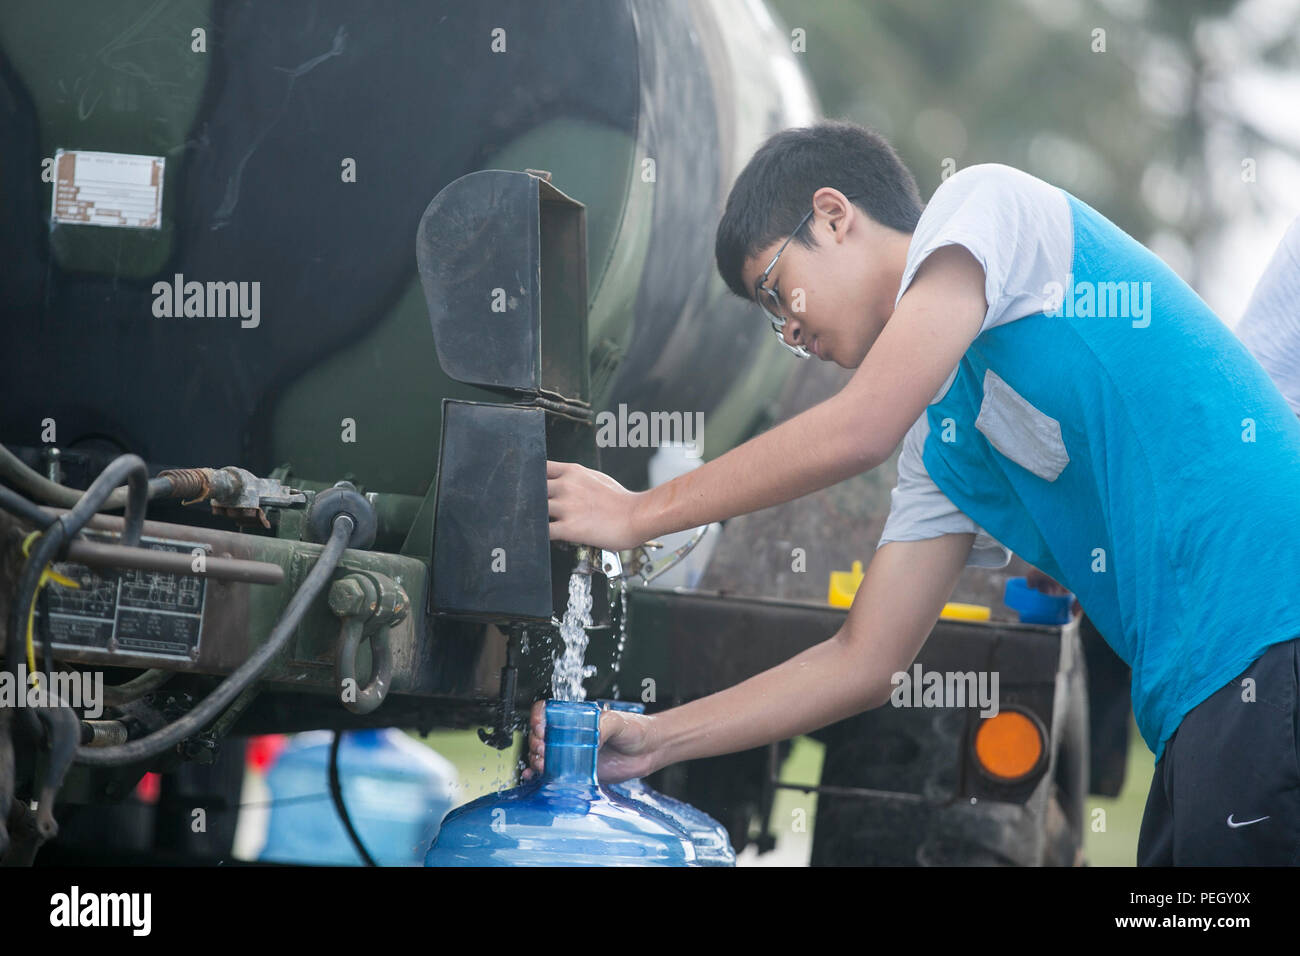 A young boy fills a water jug while U.S. Marines with Combat Logistics Battalion 31, 31st Marine Expeditionary Unit, distribute water to local civilians during typhoon relief efforts in Saipan, Aug. 13, 2015. The Marines and sailors of the 31st MEU assisted the people of Saipan by producing and distributing potable water. The MEU was conducting training near the Mariana Islands when it was redirected to Saipan after the island was struck by Typhoon Soudelor Aug. 2-3.  (U.S. Marine Corps photo by Lance Cpl. Brian Bekkala/Released) Stock Photo